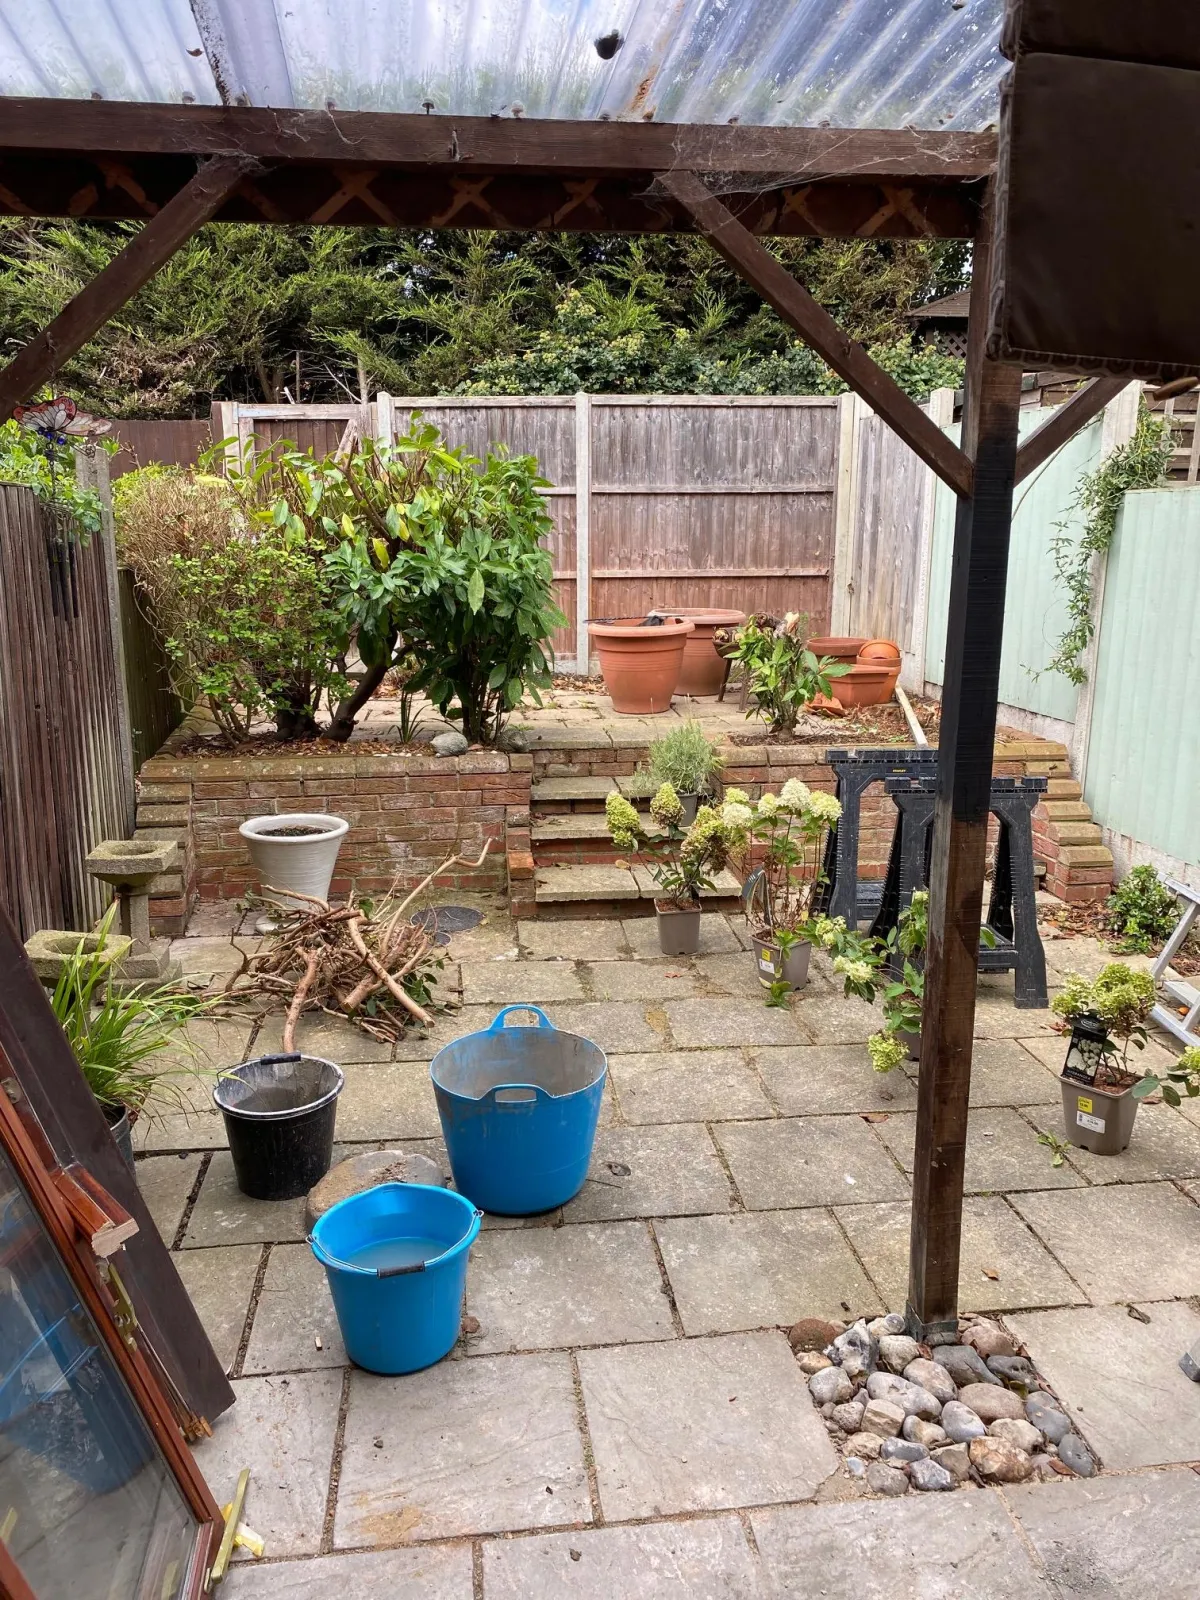 The courtyard garden in the tidying process